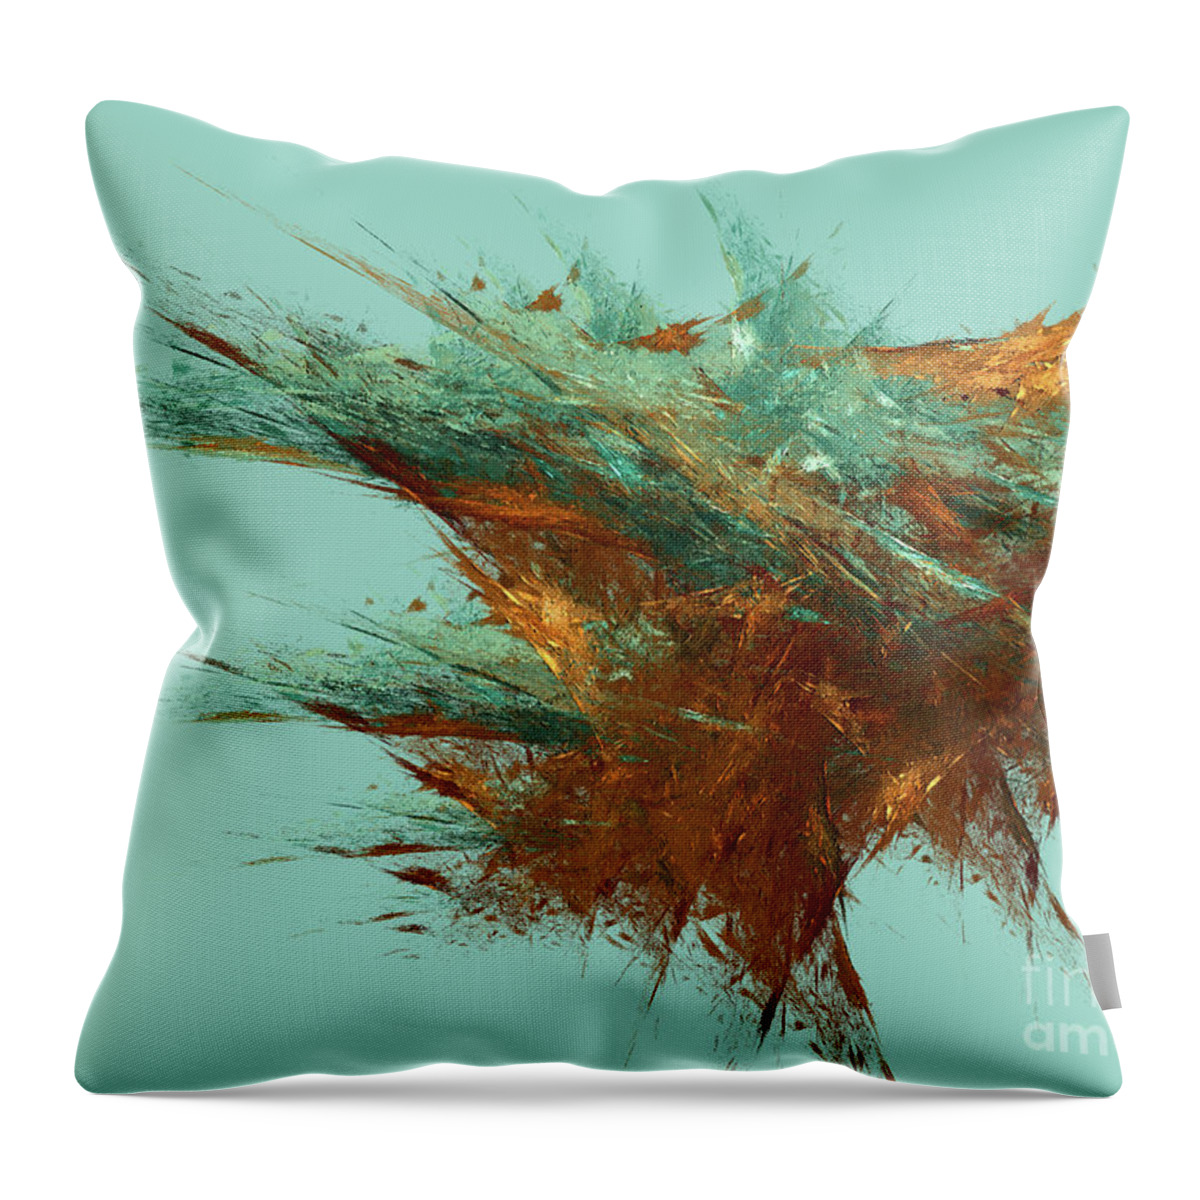 Abstract Throw Pillow featuring the digital art Andee Design Abstract 23 2018 by Andee Design